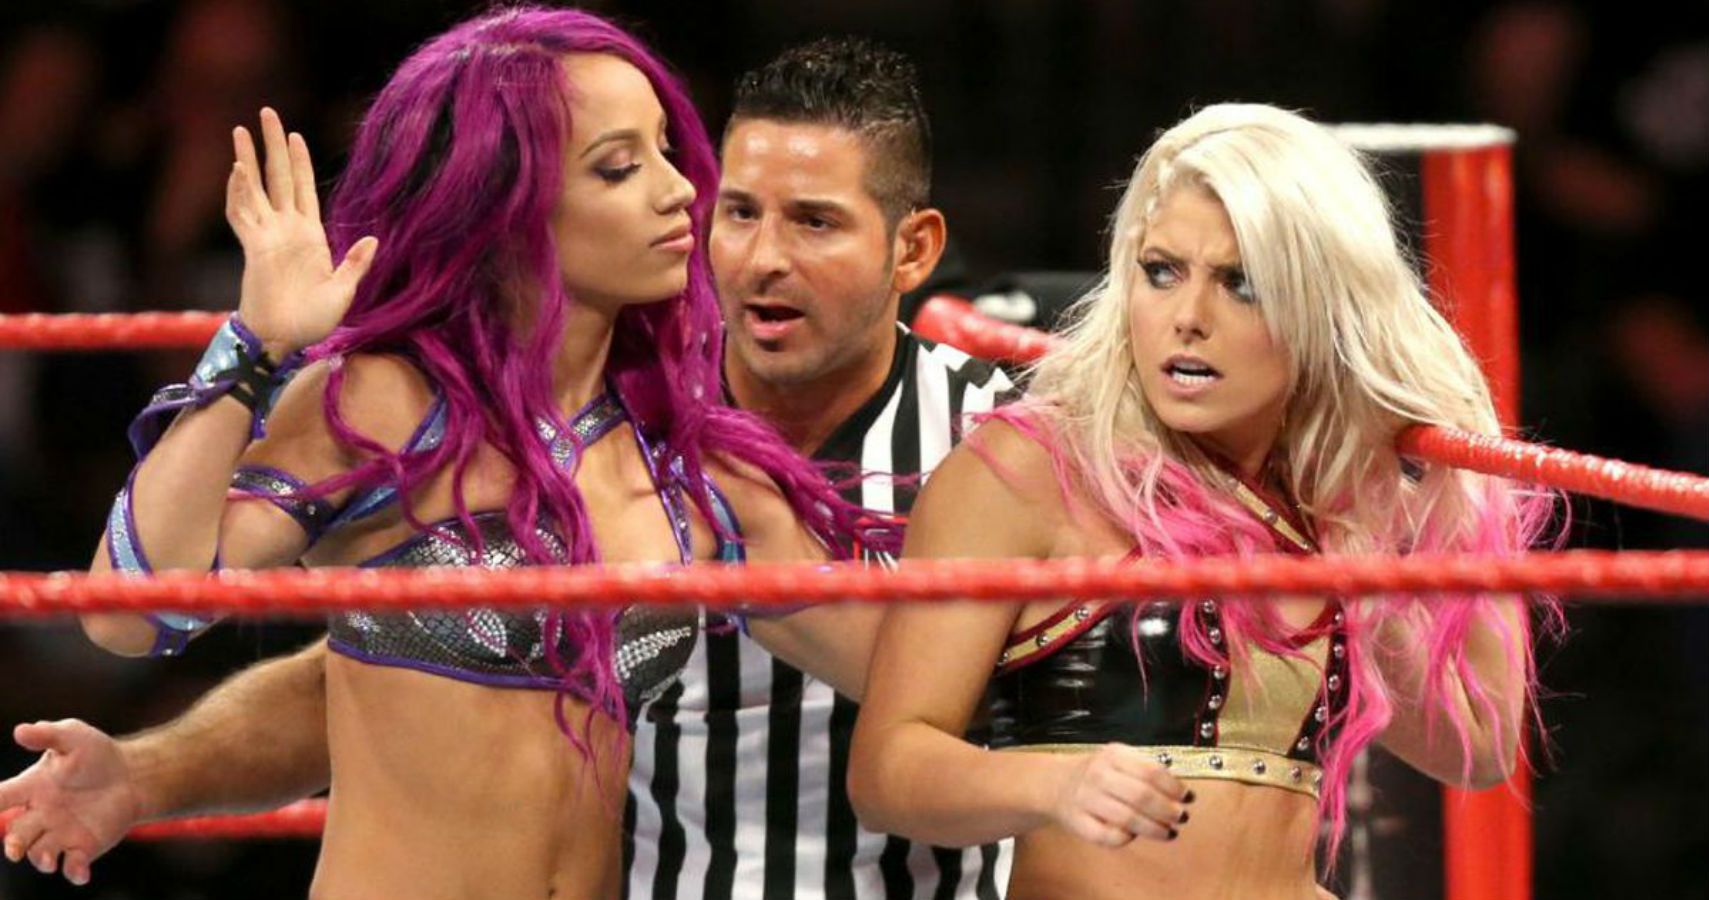 Do Banks And Bliss Have Issues Beyond The Ring Thesportster